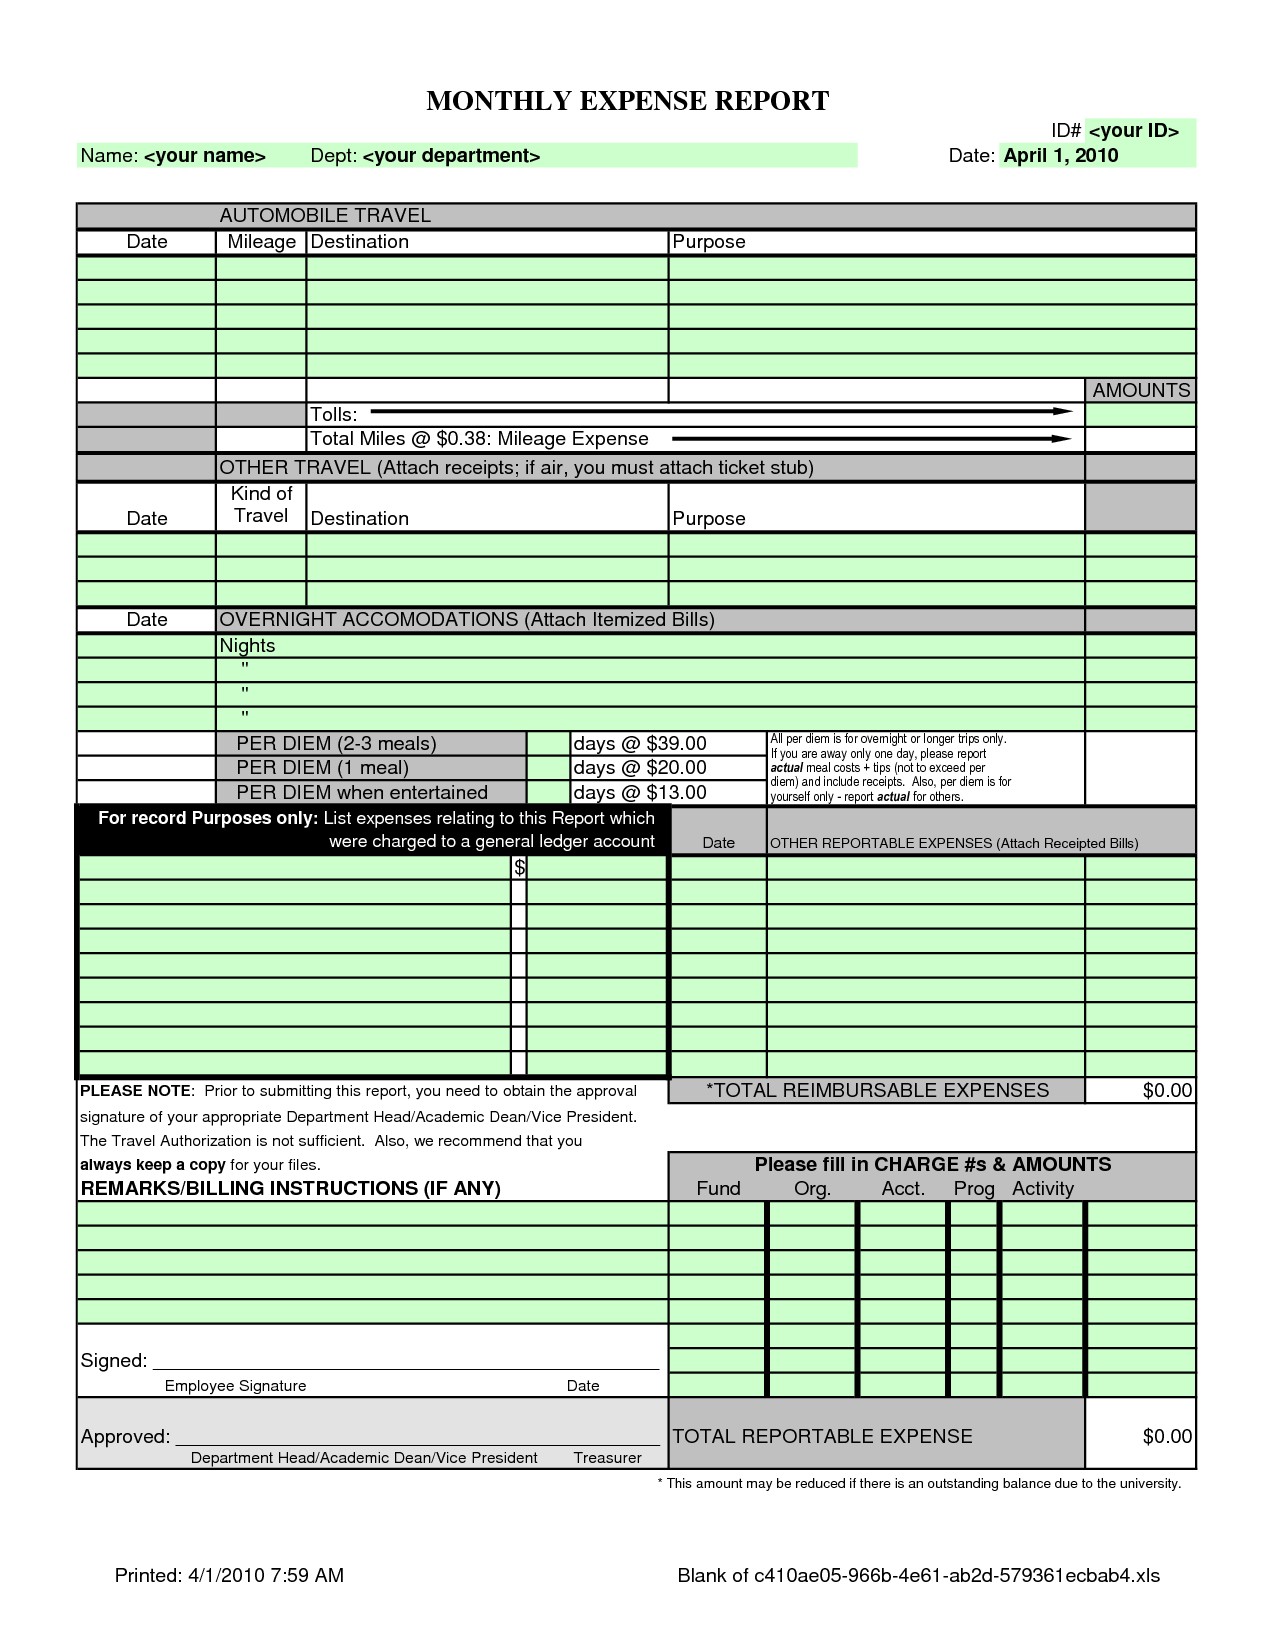 Monthly Expense Report Template Charlotte Clergy Coalition Document Free For Small